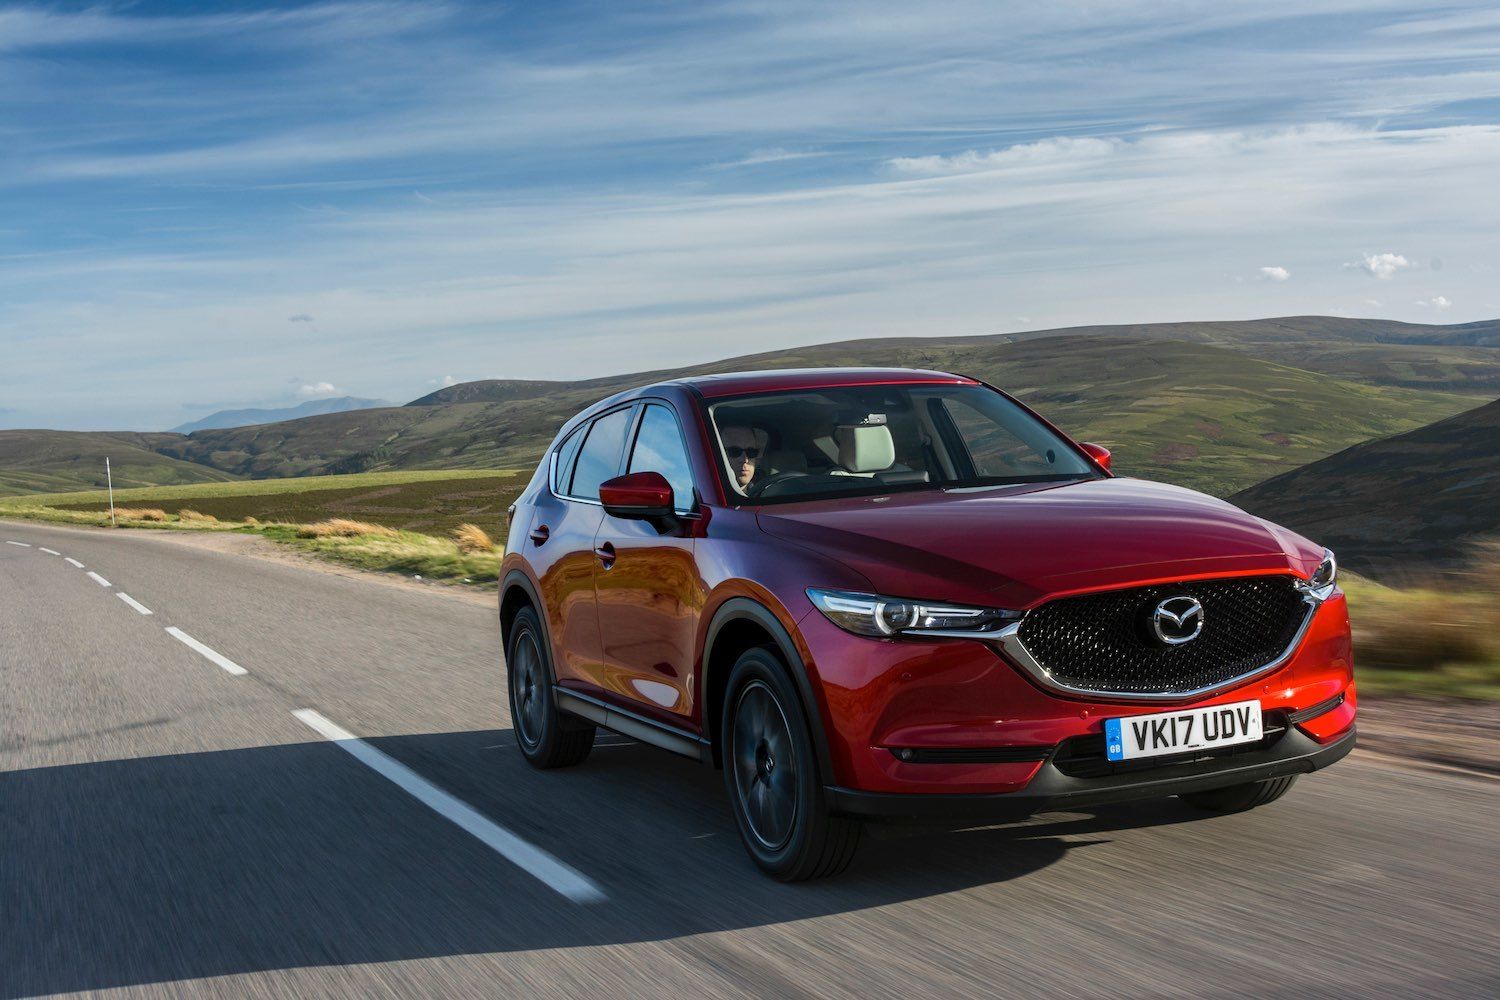 Tom Scanlan reviews the all new Mazda CX-5 in the Cairngorms Scotland for drive 11